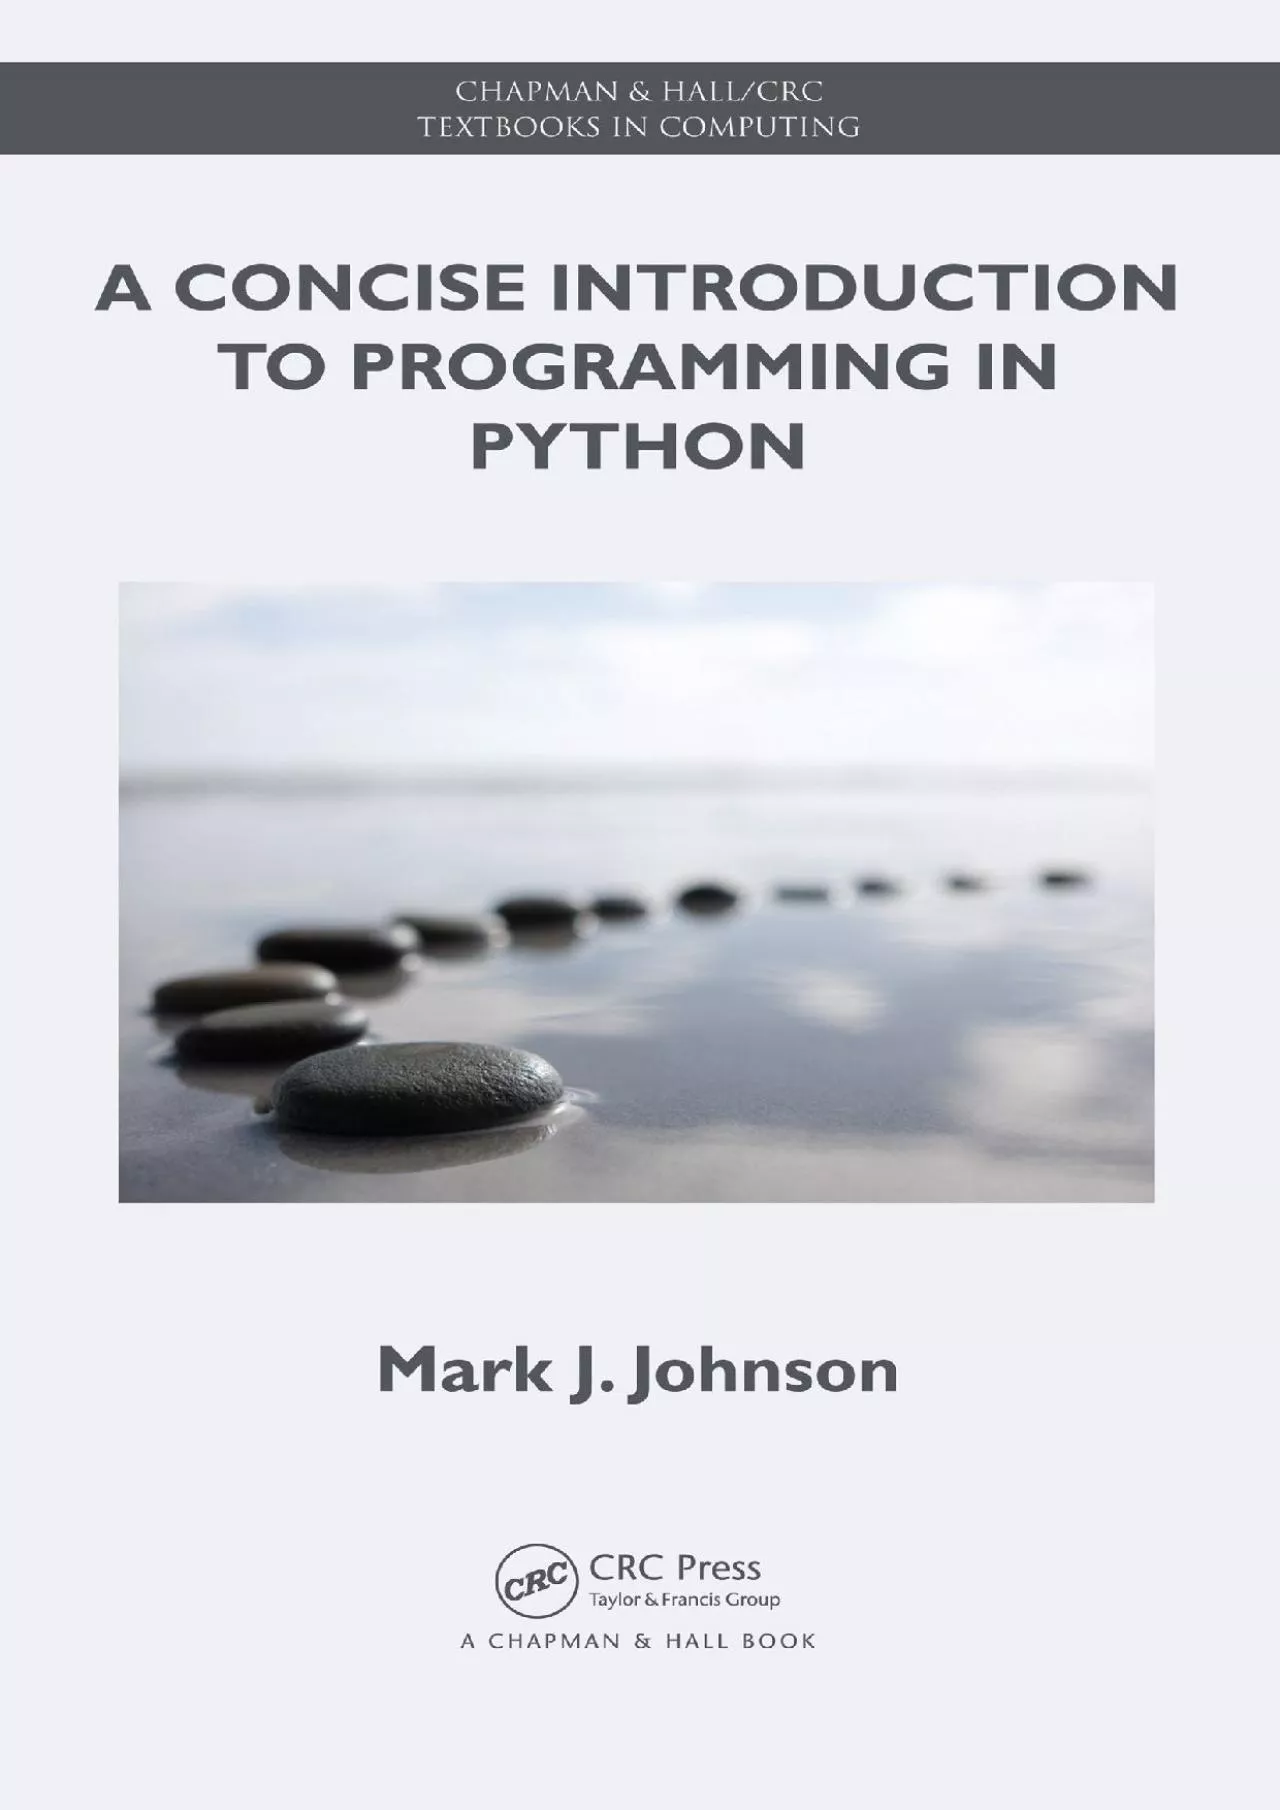 [READING BOOK]-A Concise Introduction to Programming in Python (Chapman & HallCRC Textbooks